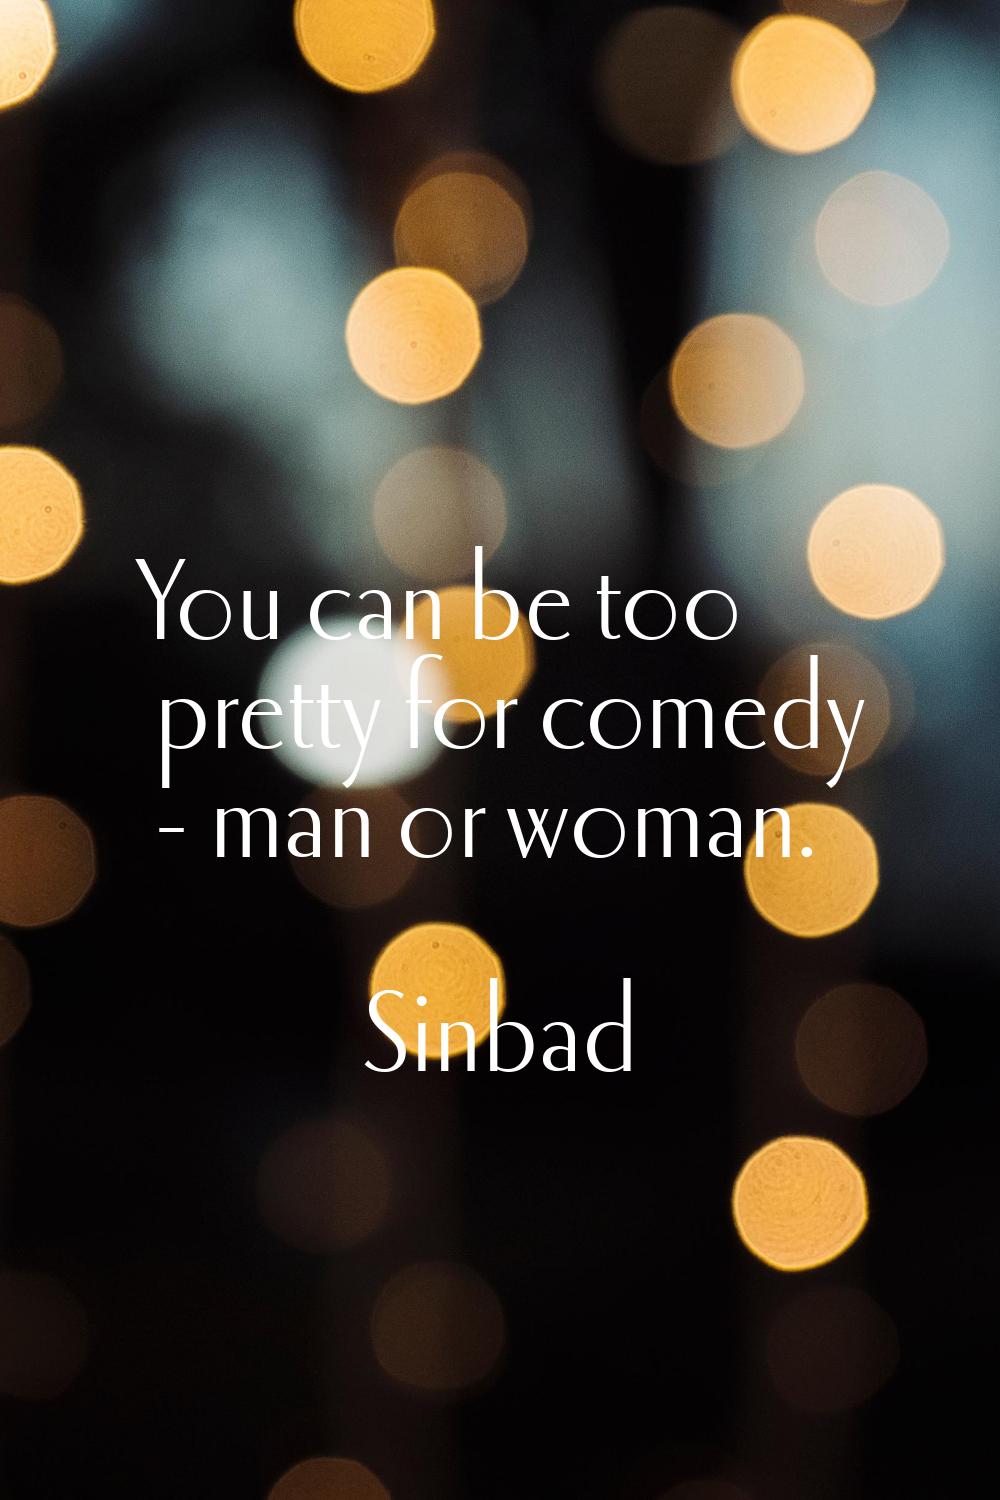 You can be too pretty for comedy - man or woman.